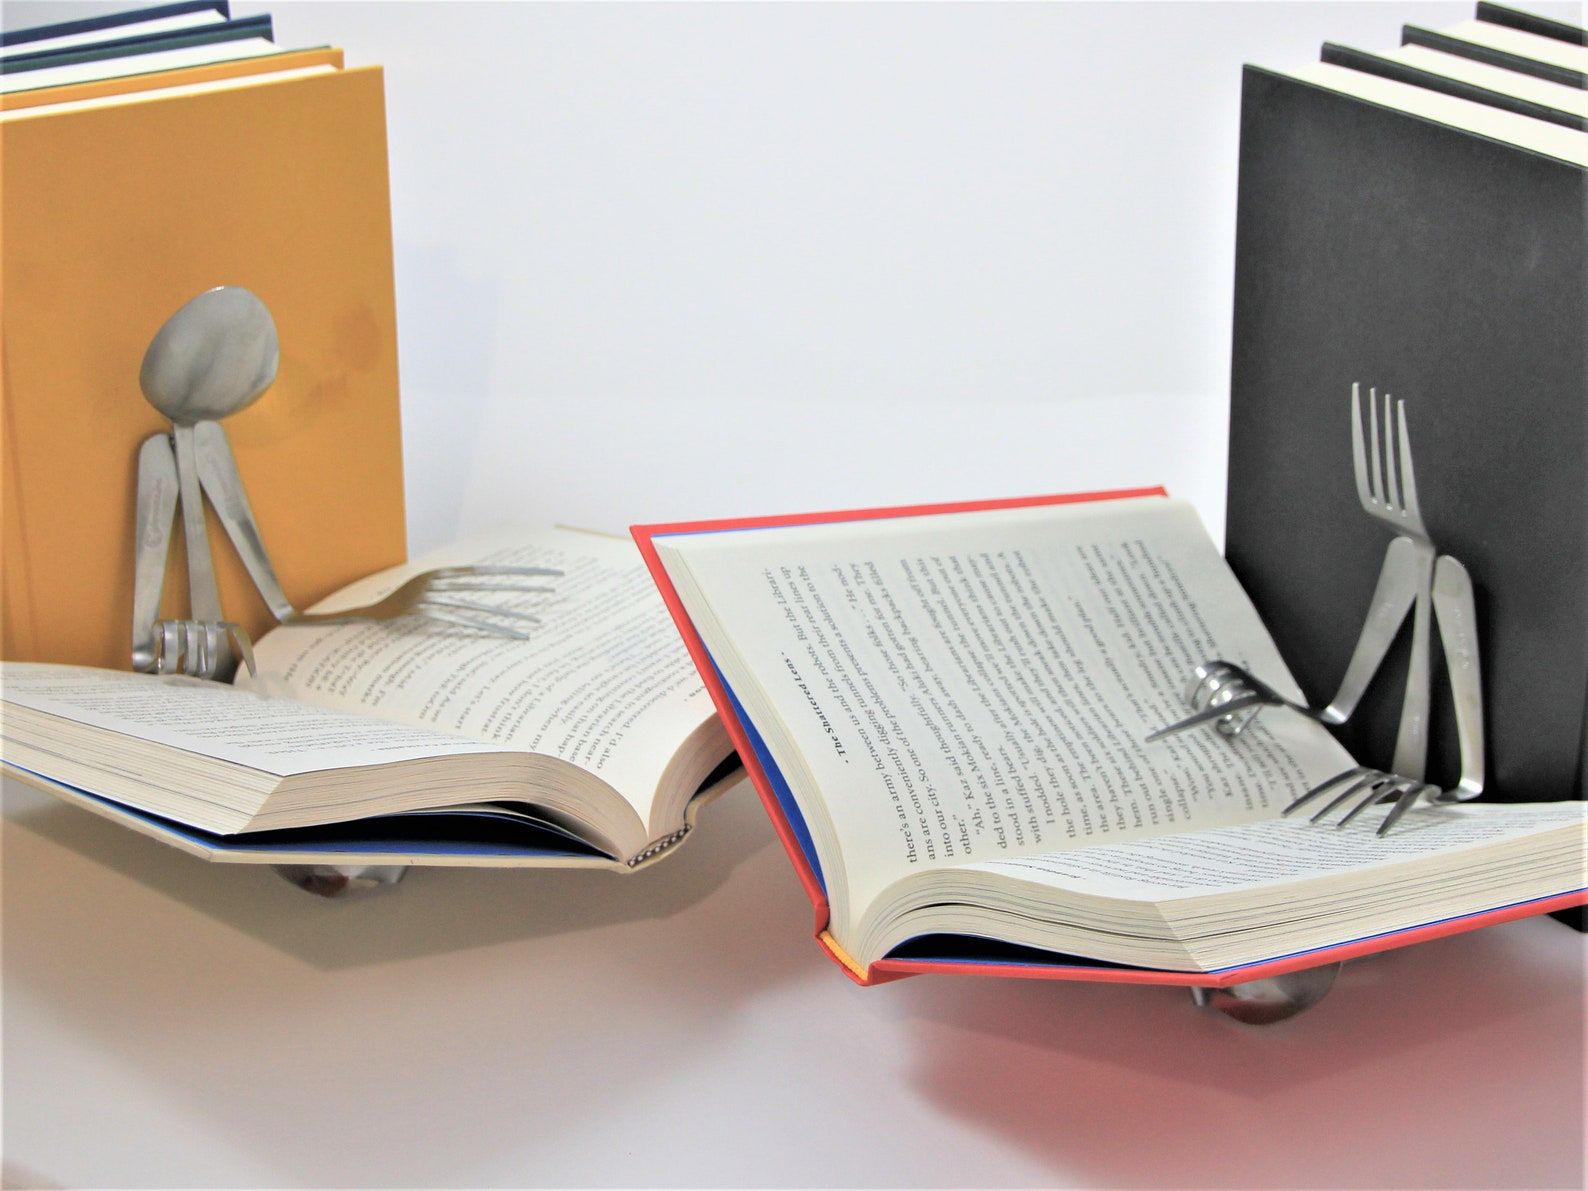 Set of bookends. The one on the left is a spoon, using forms to hold open a book. The right is a fork, also using forks to hold open a book. 